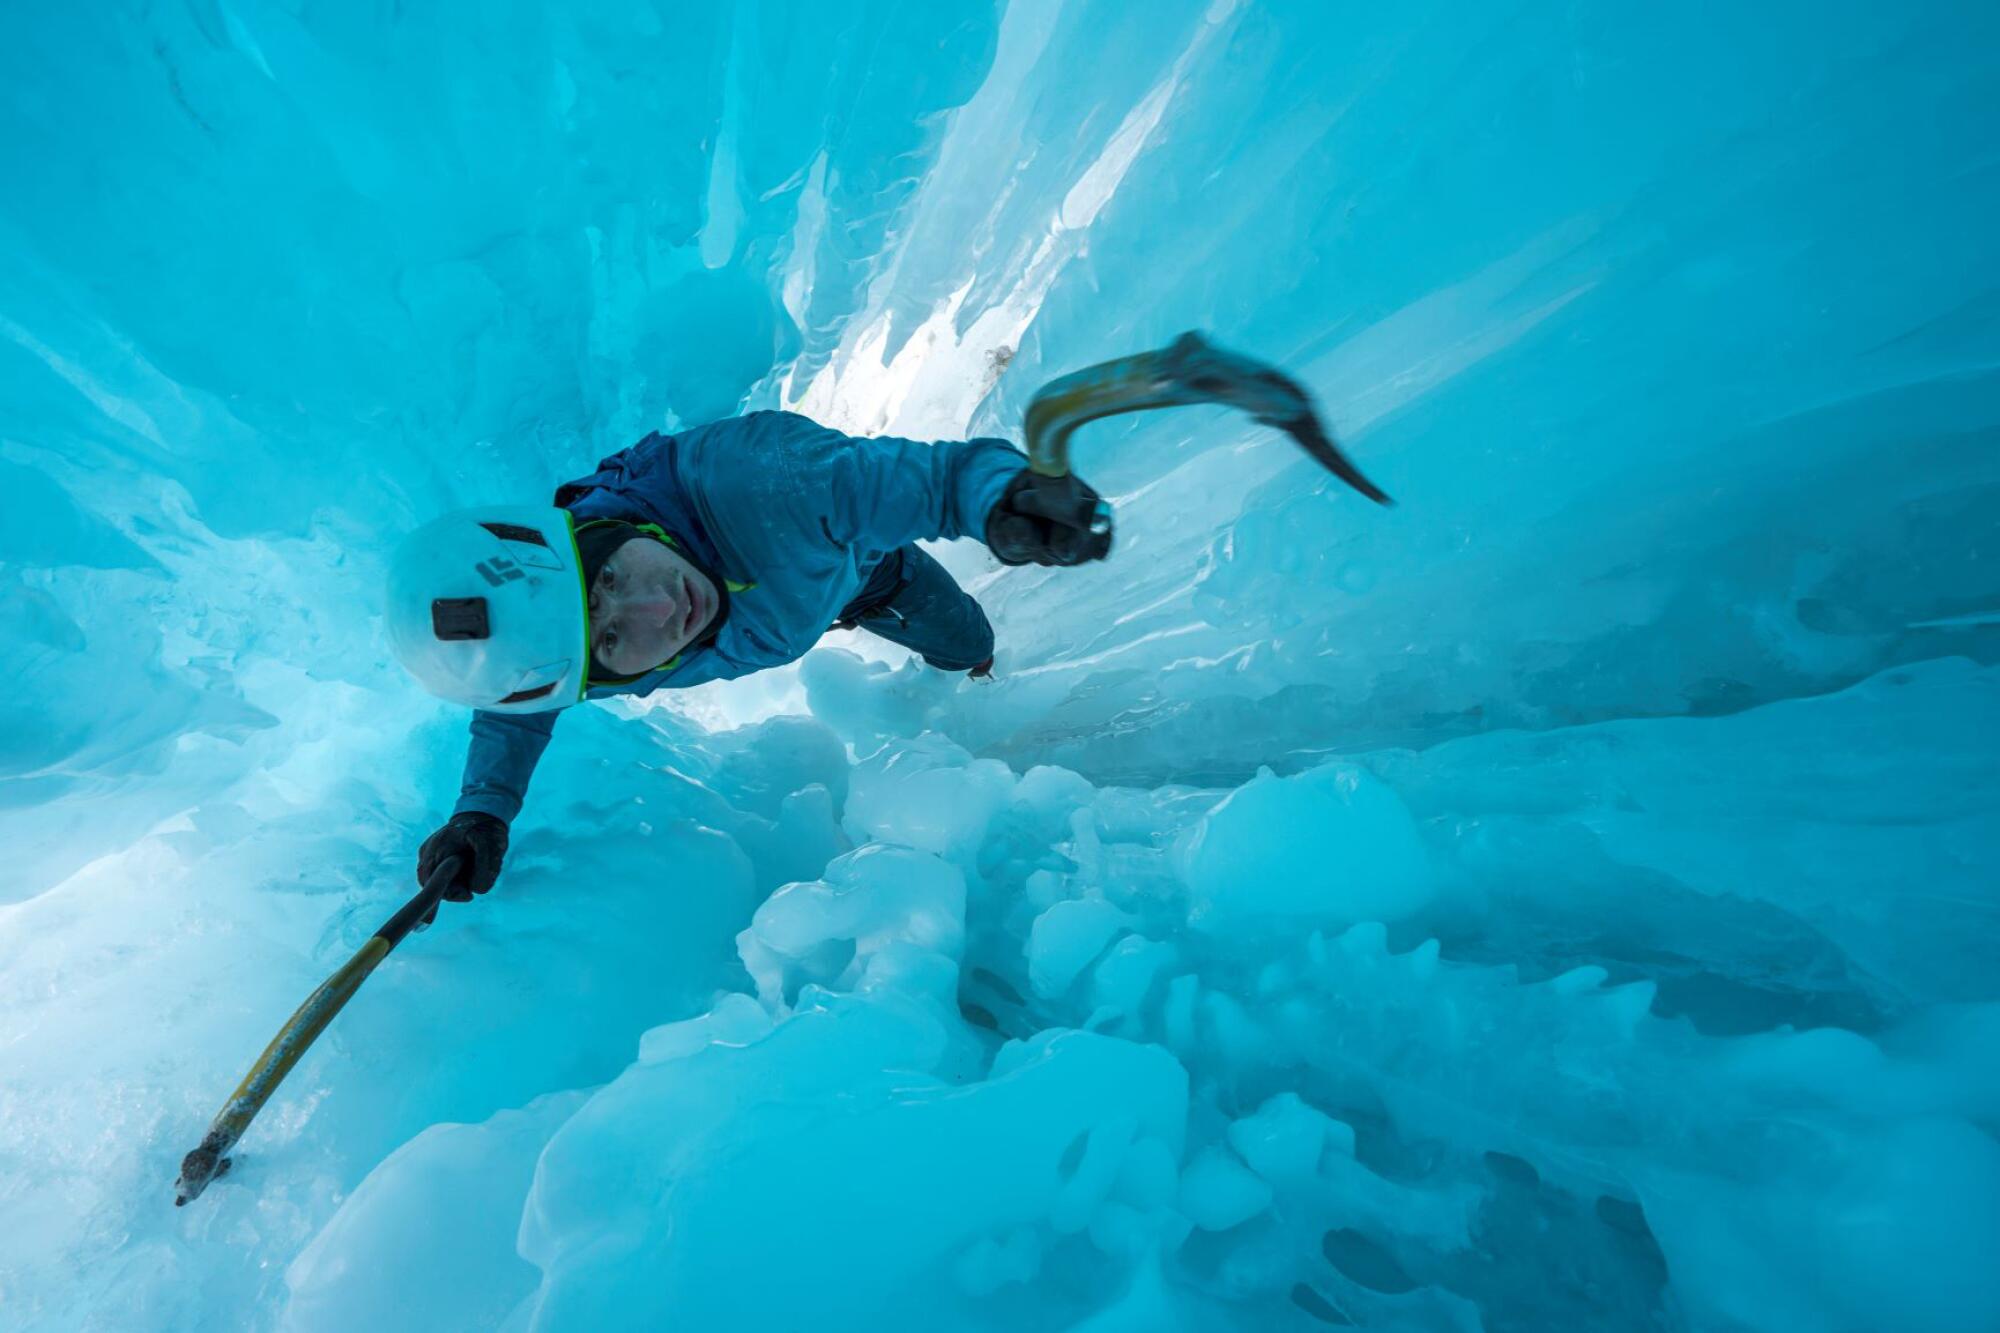 A young man uses an ice pick to climb up a glacier